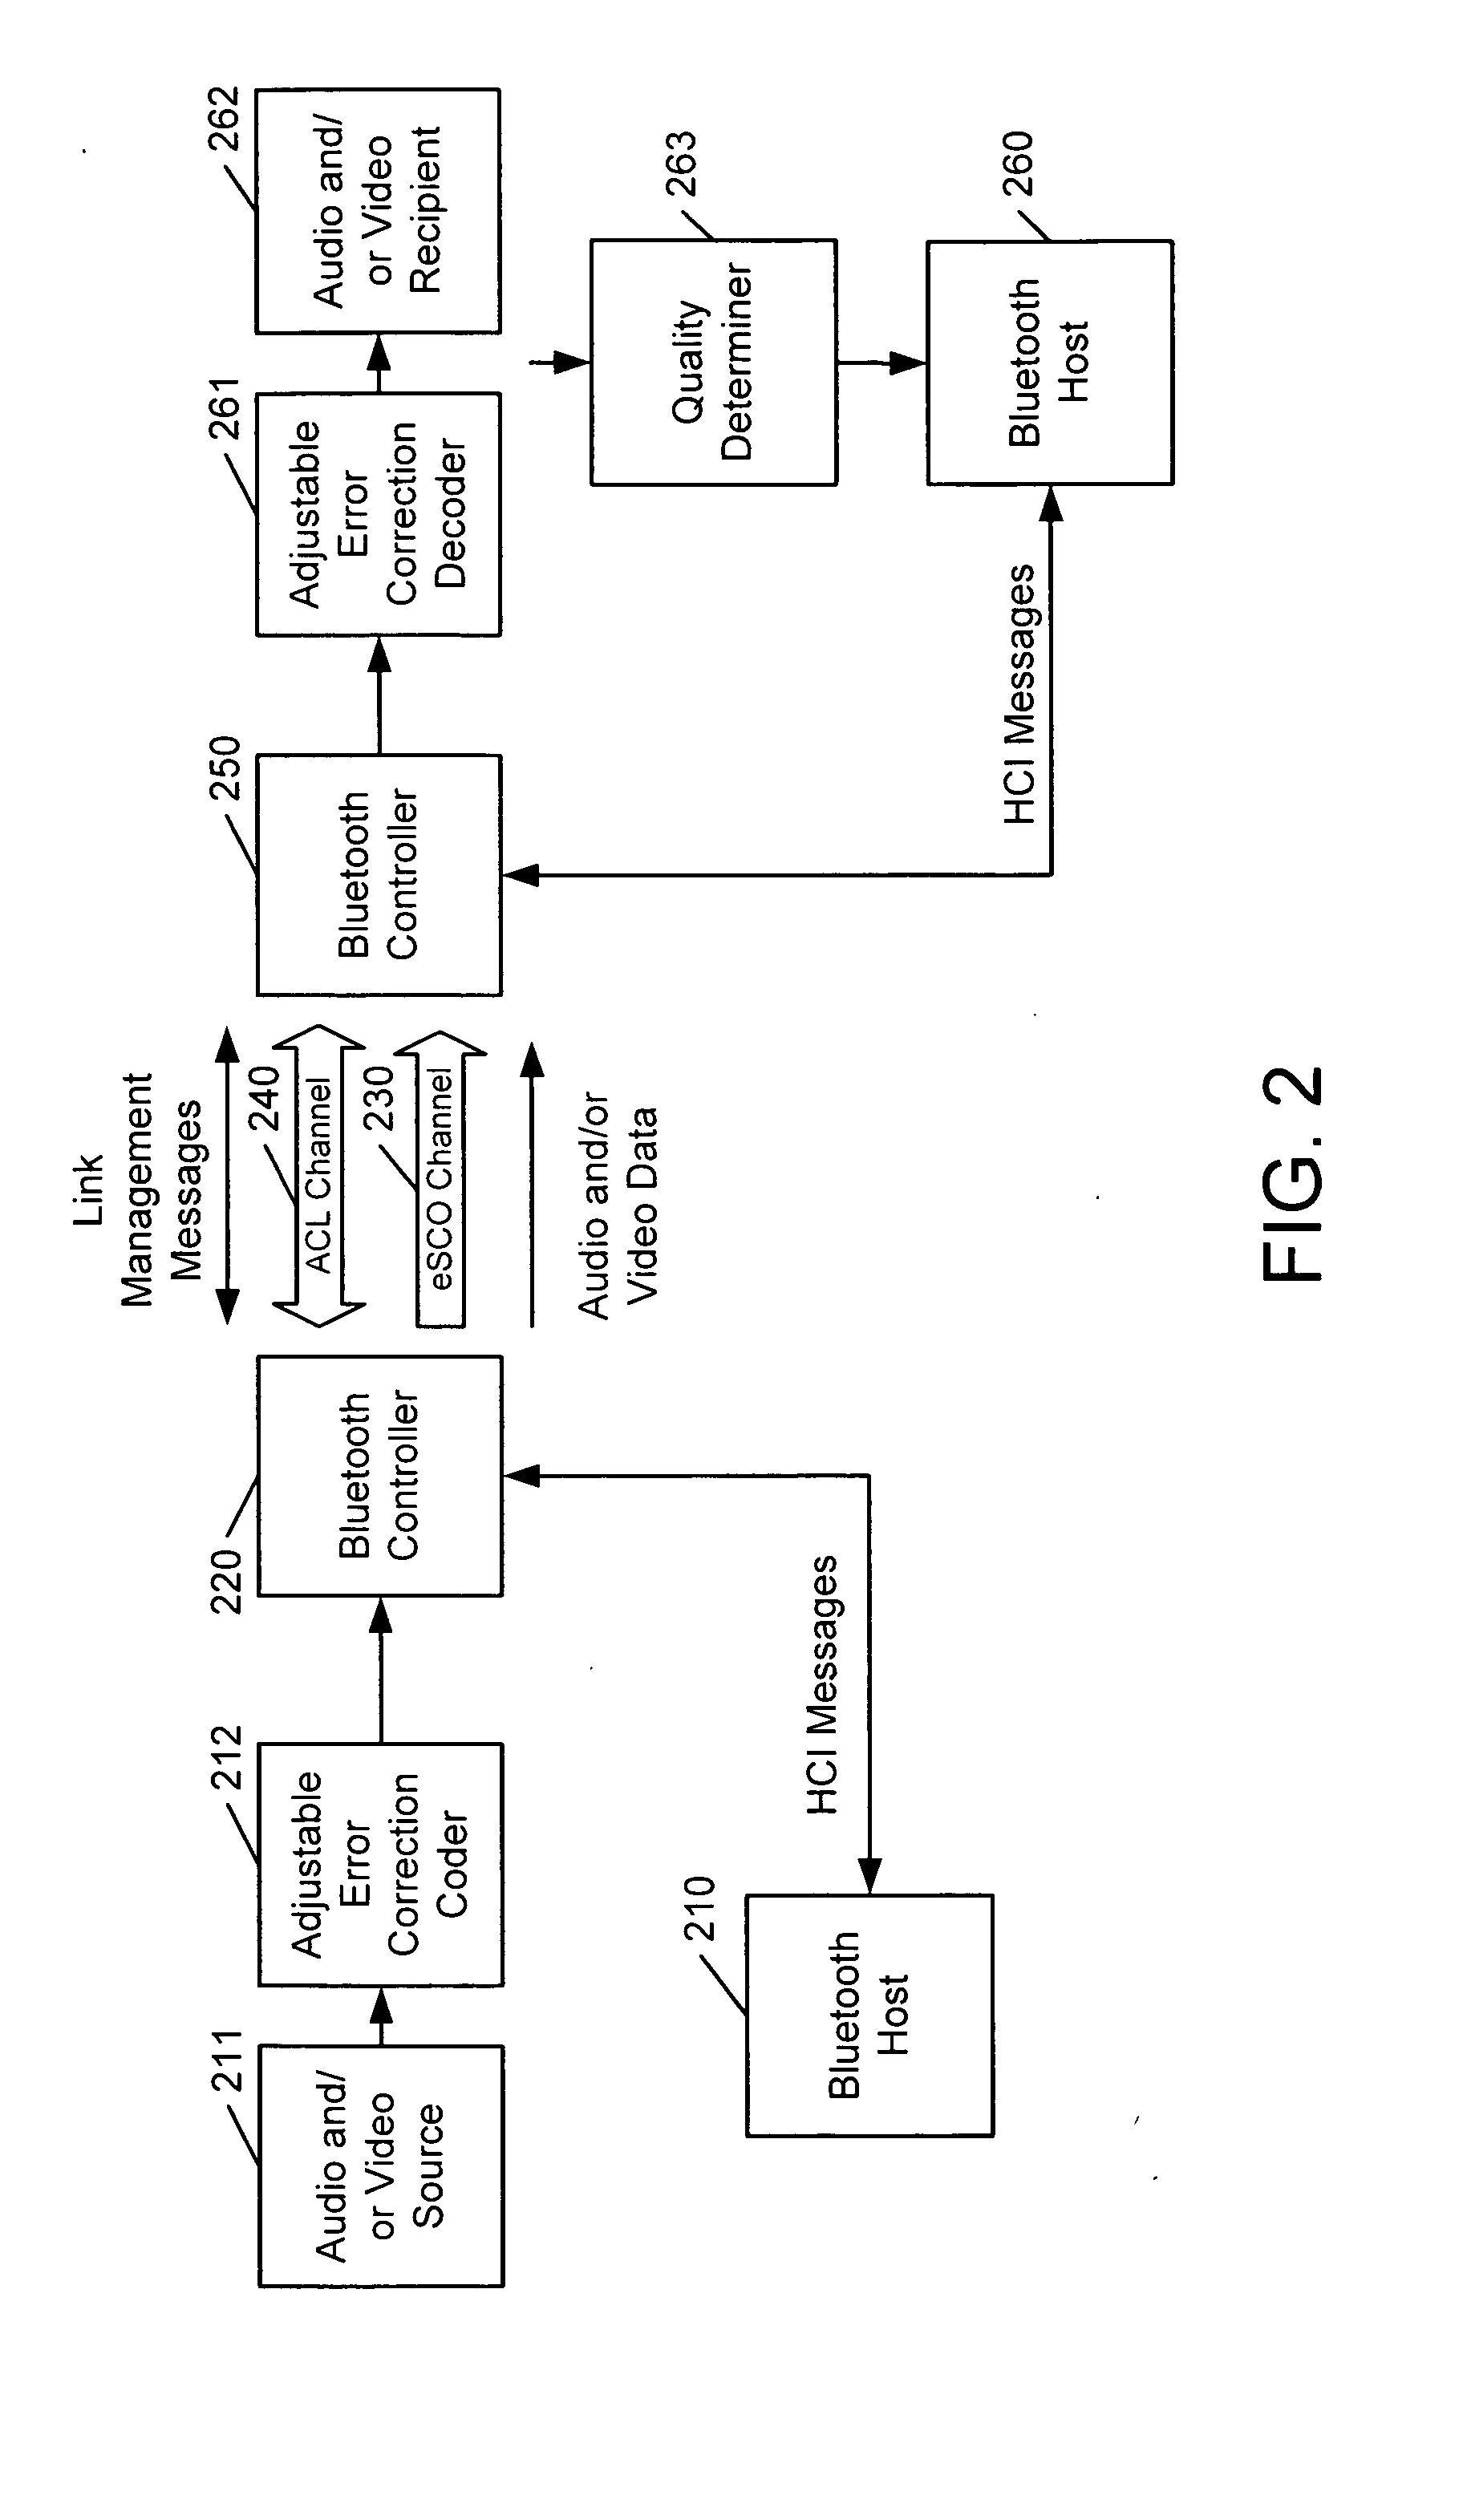 Apparatus, methods and computer program products for transmission of data over an adjustable synchronous radio channel